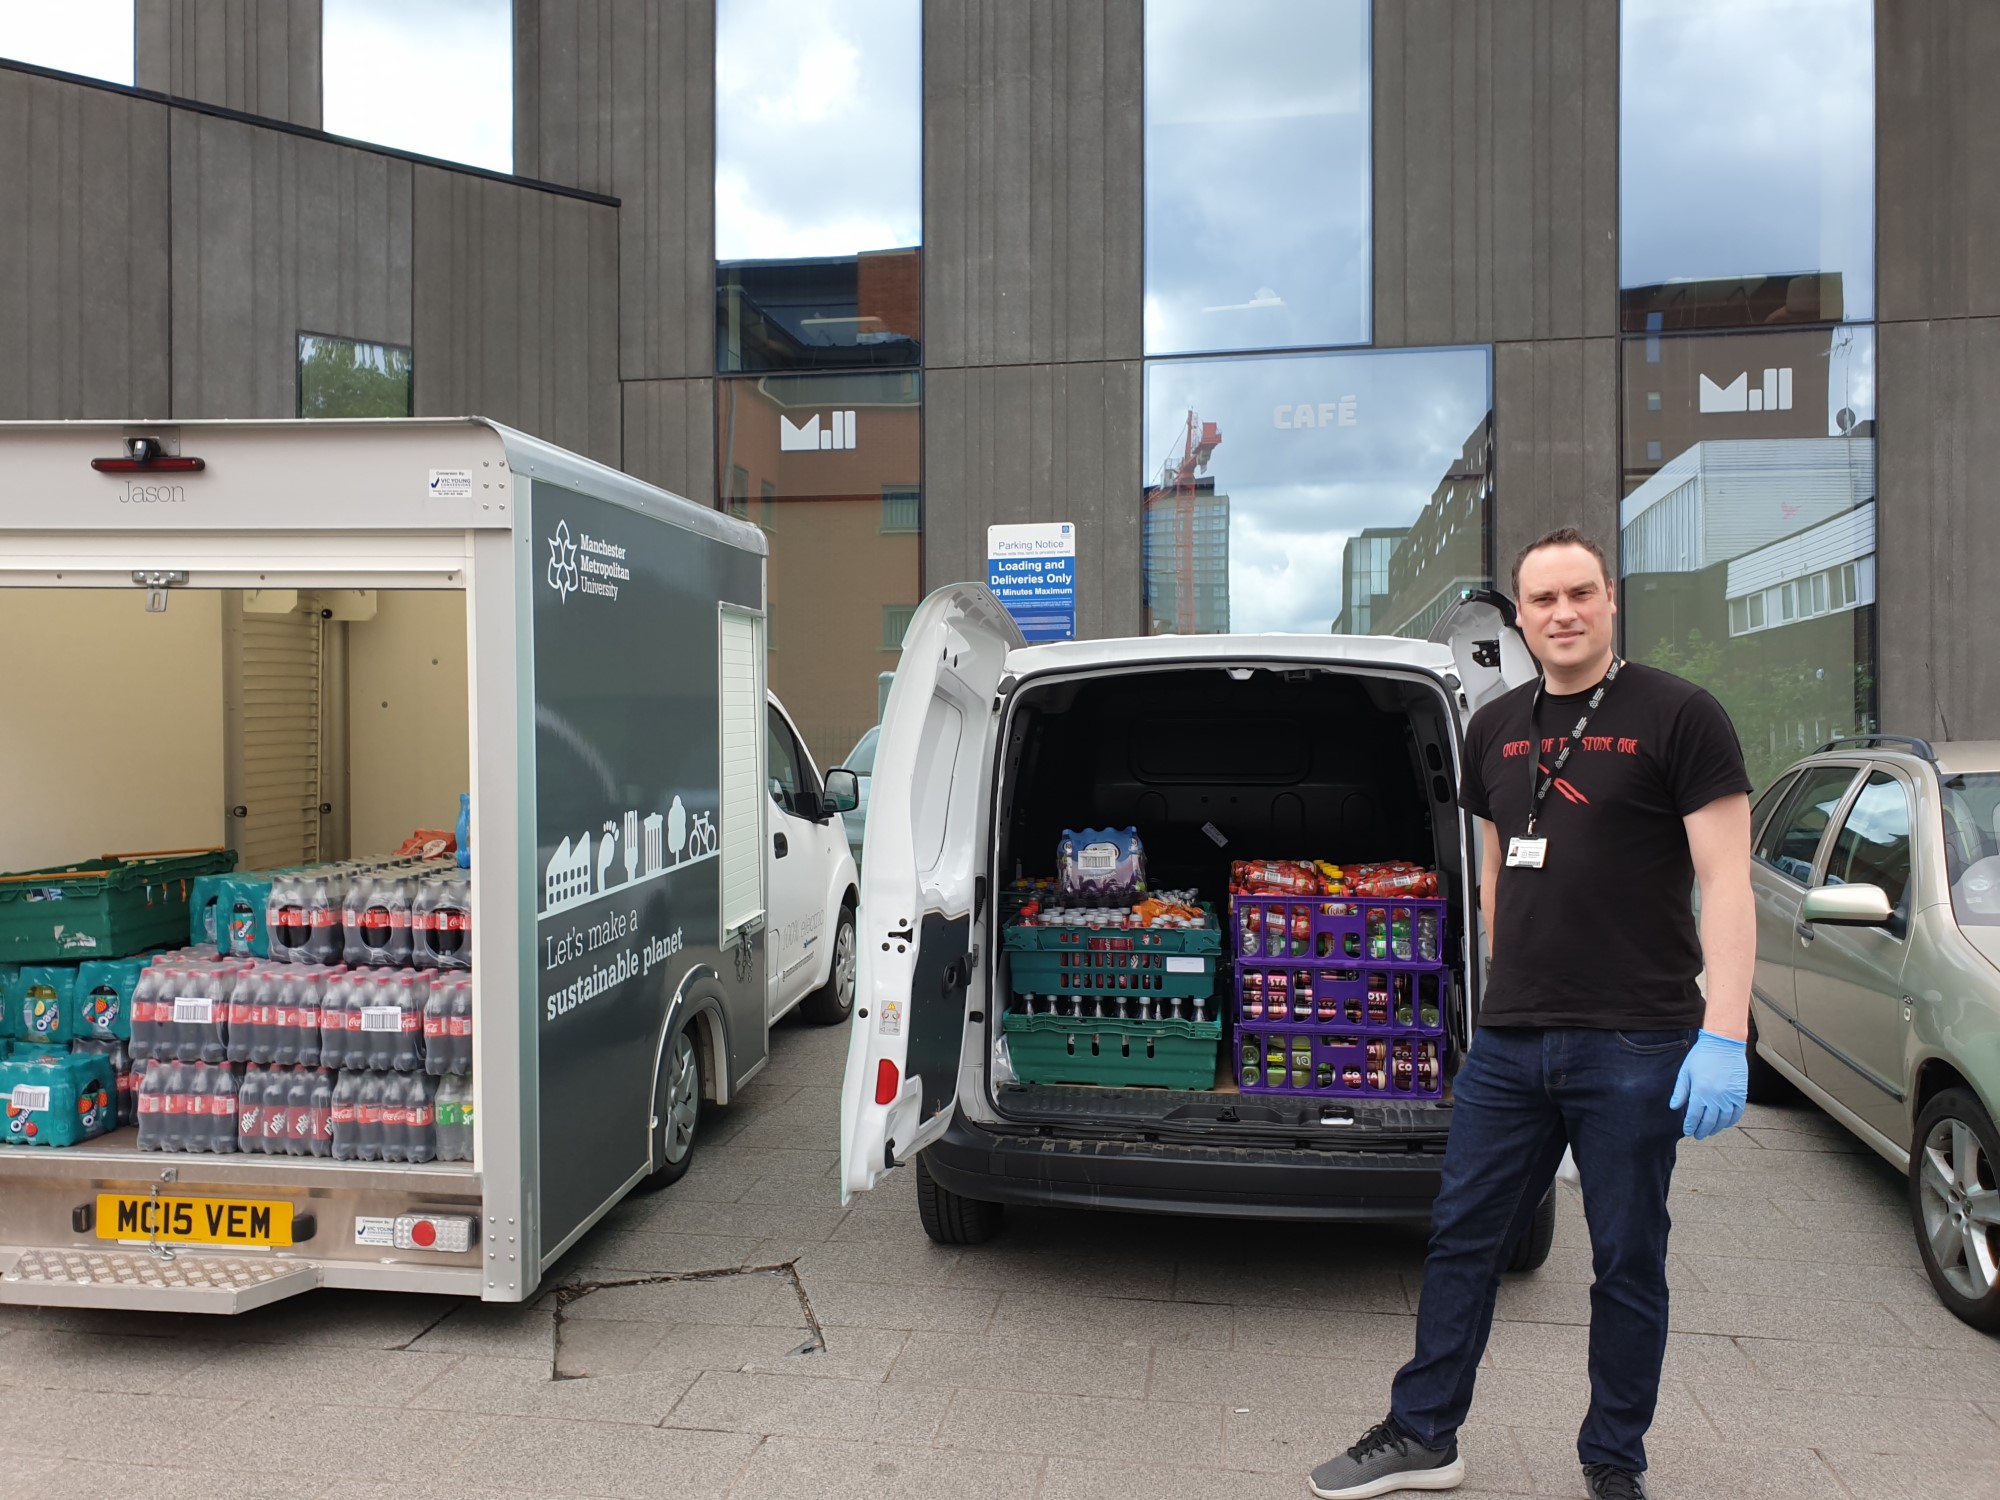 Ben Collier, Head of Catering at Manchester Metropolitan, loads the donations into a van